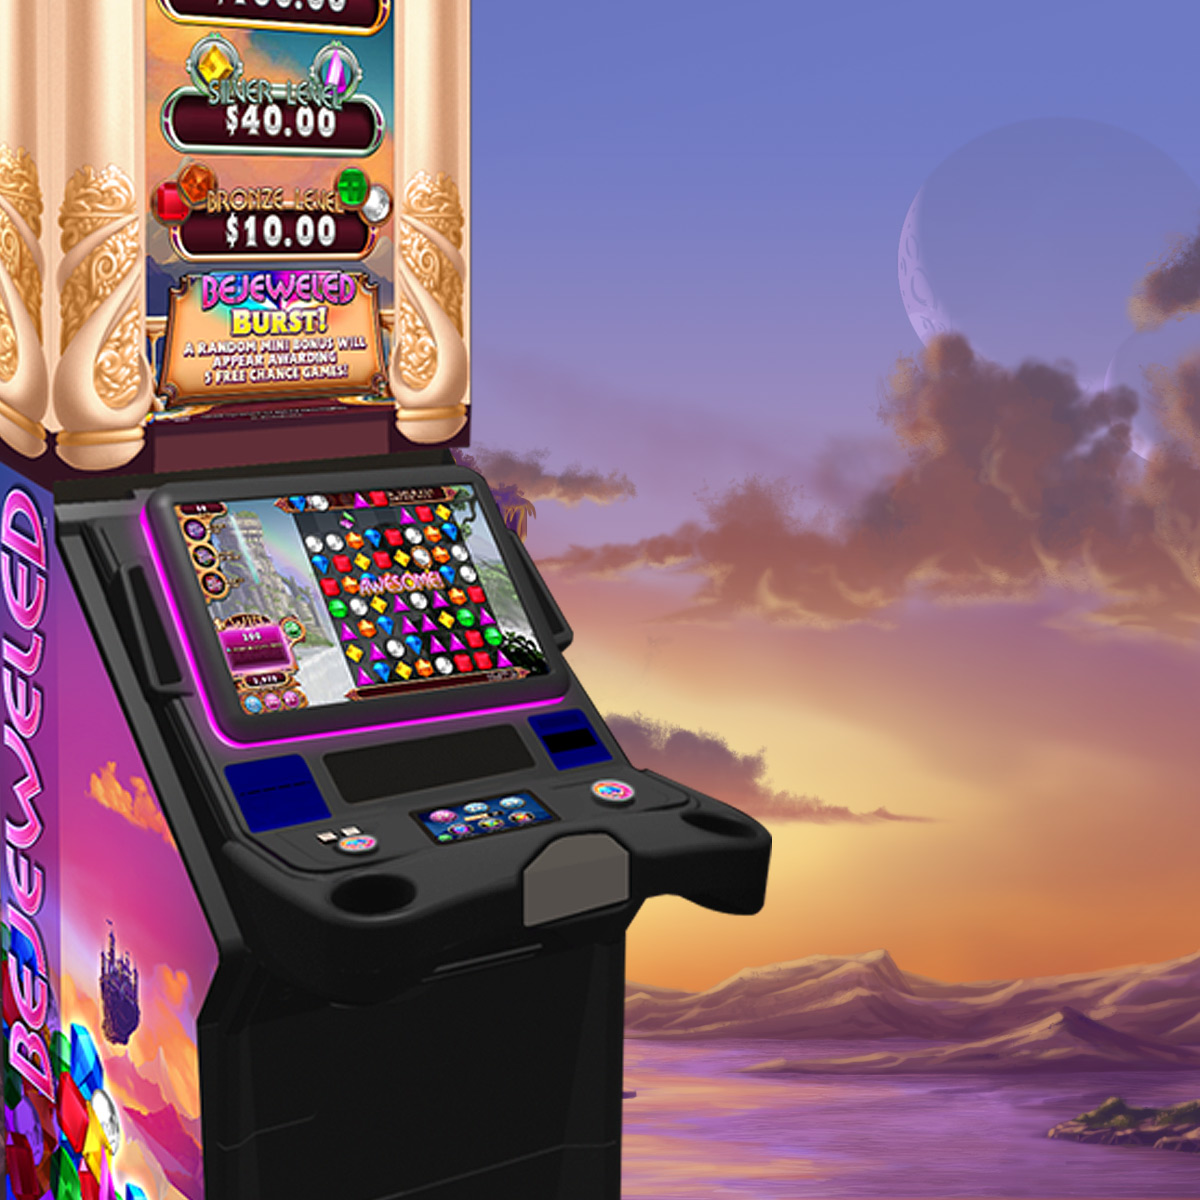 Time Square Casino Bejeweled slot game